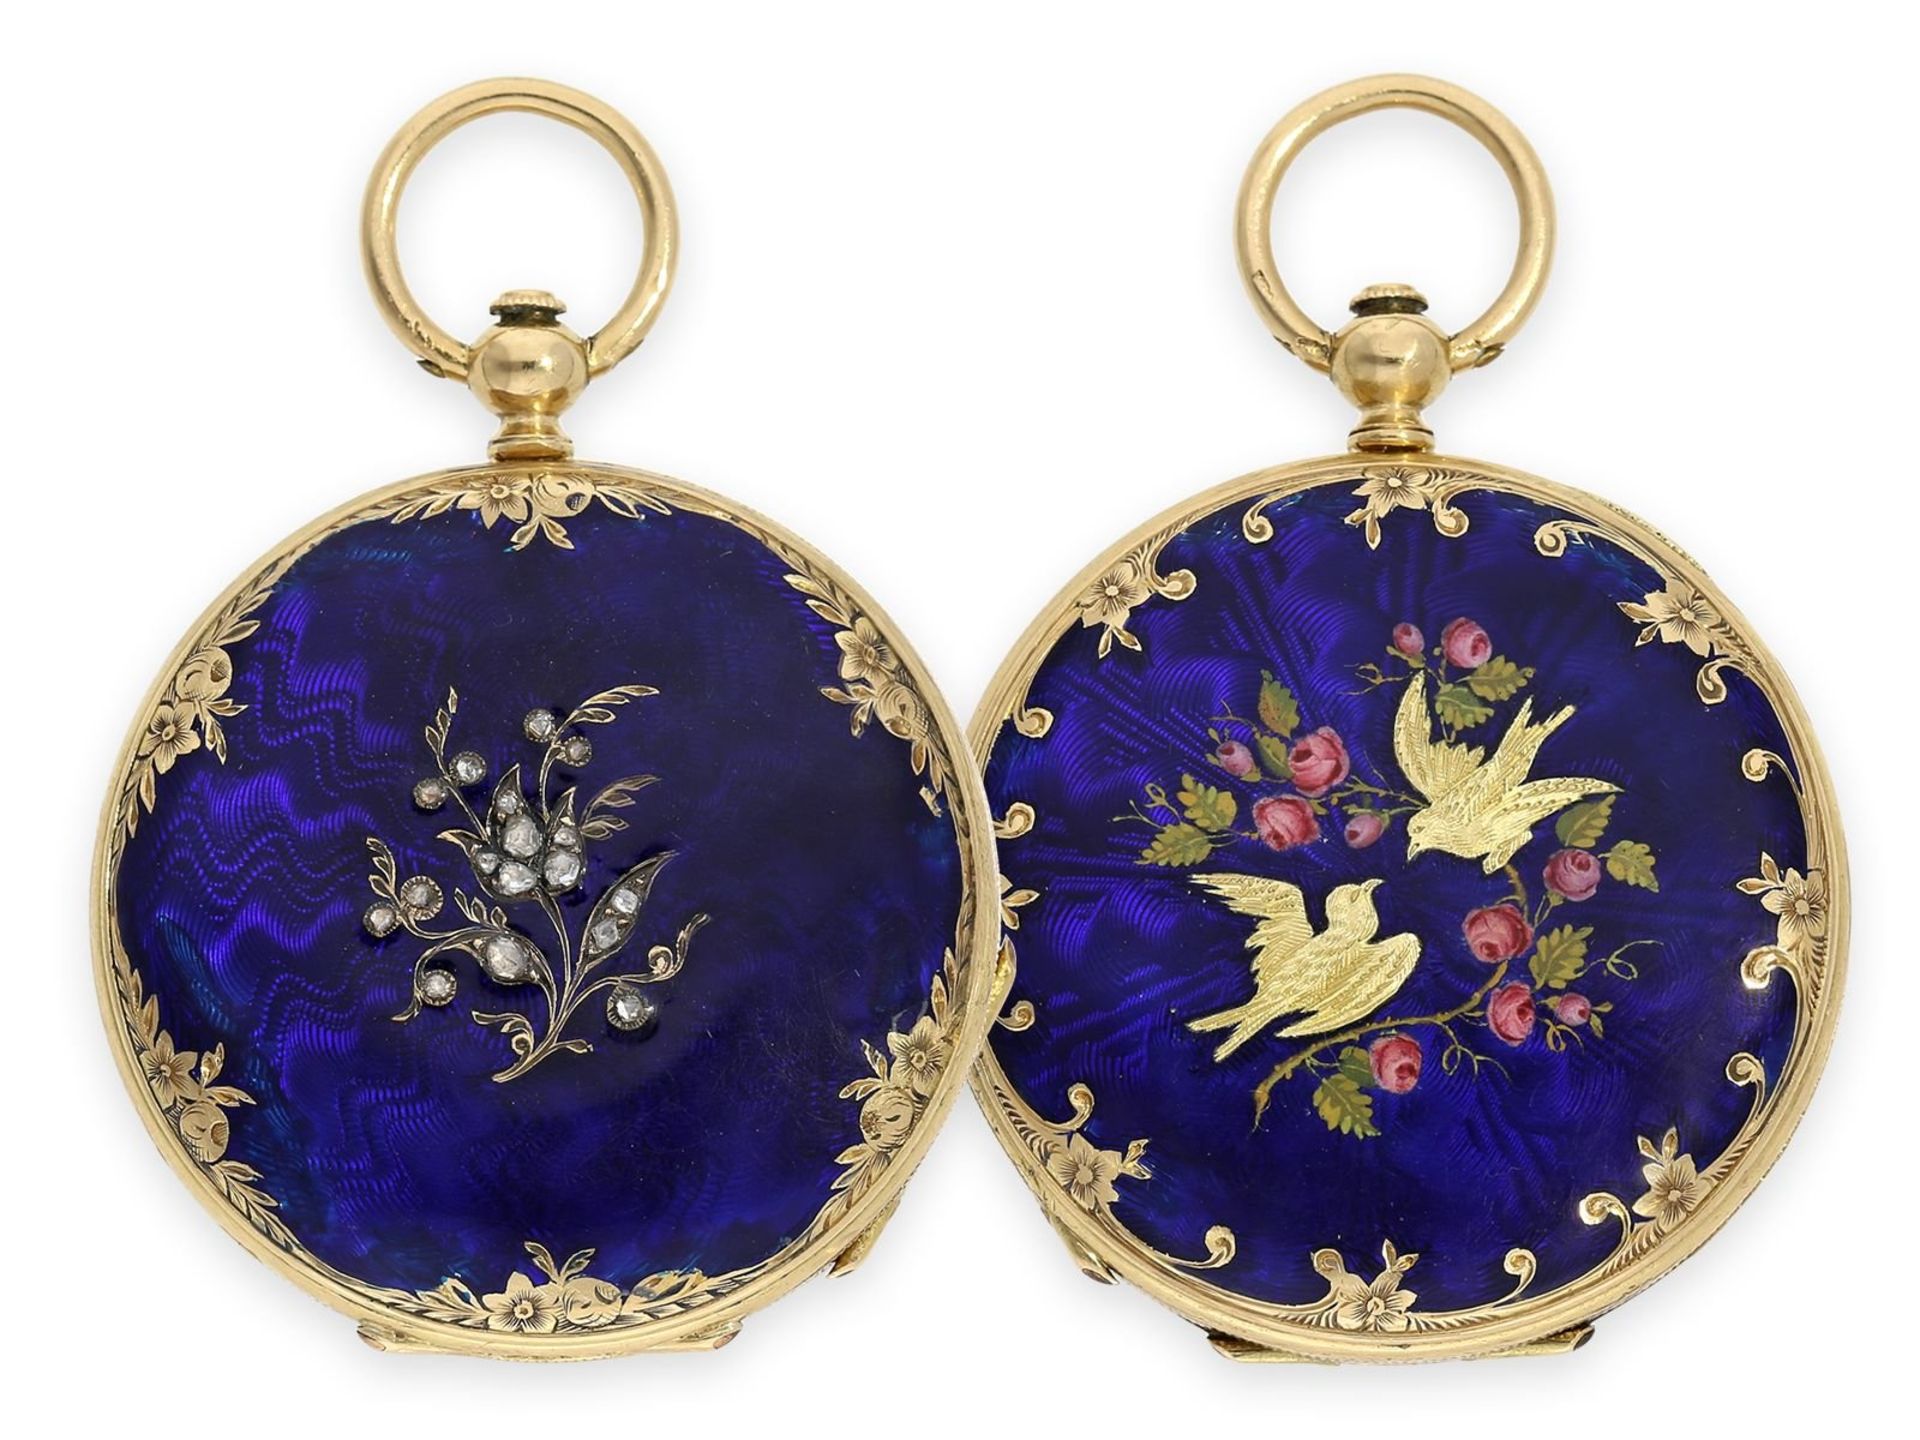 Pocket watch: beautiful gold/ enamel hunting case watch in the style of the early watches by Patek &